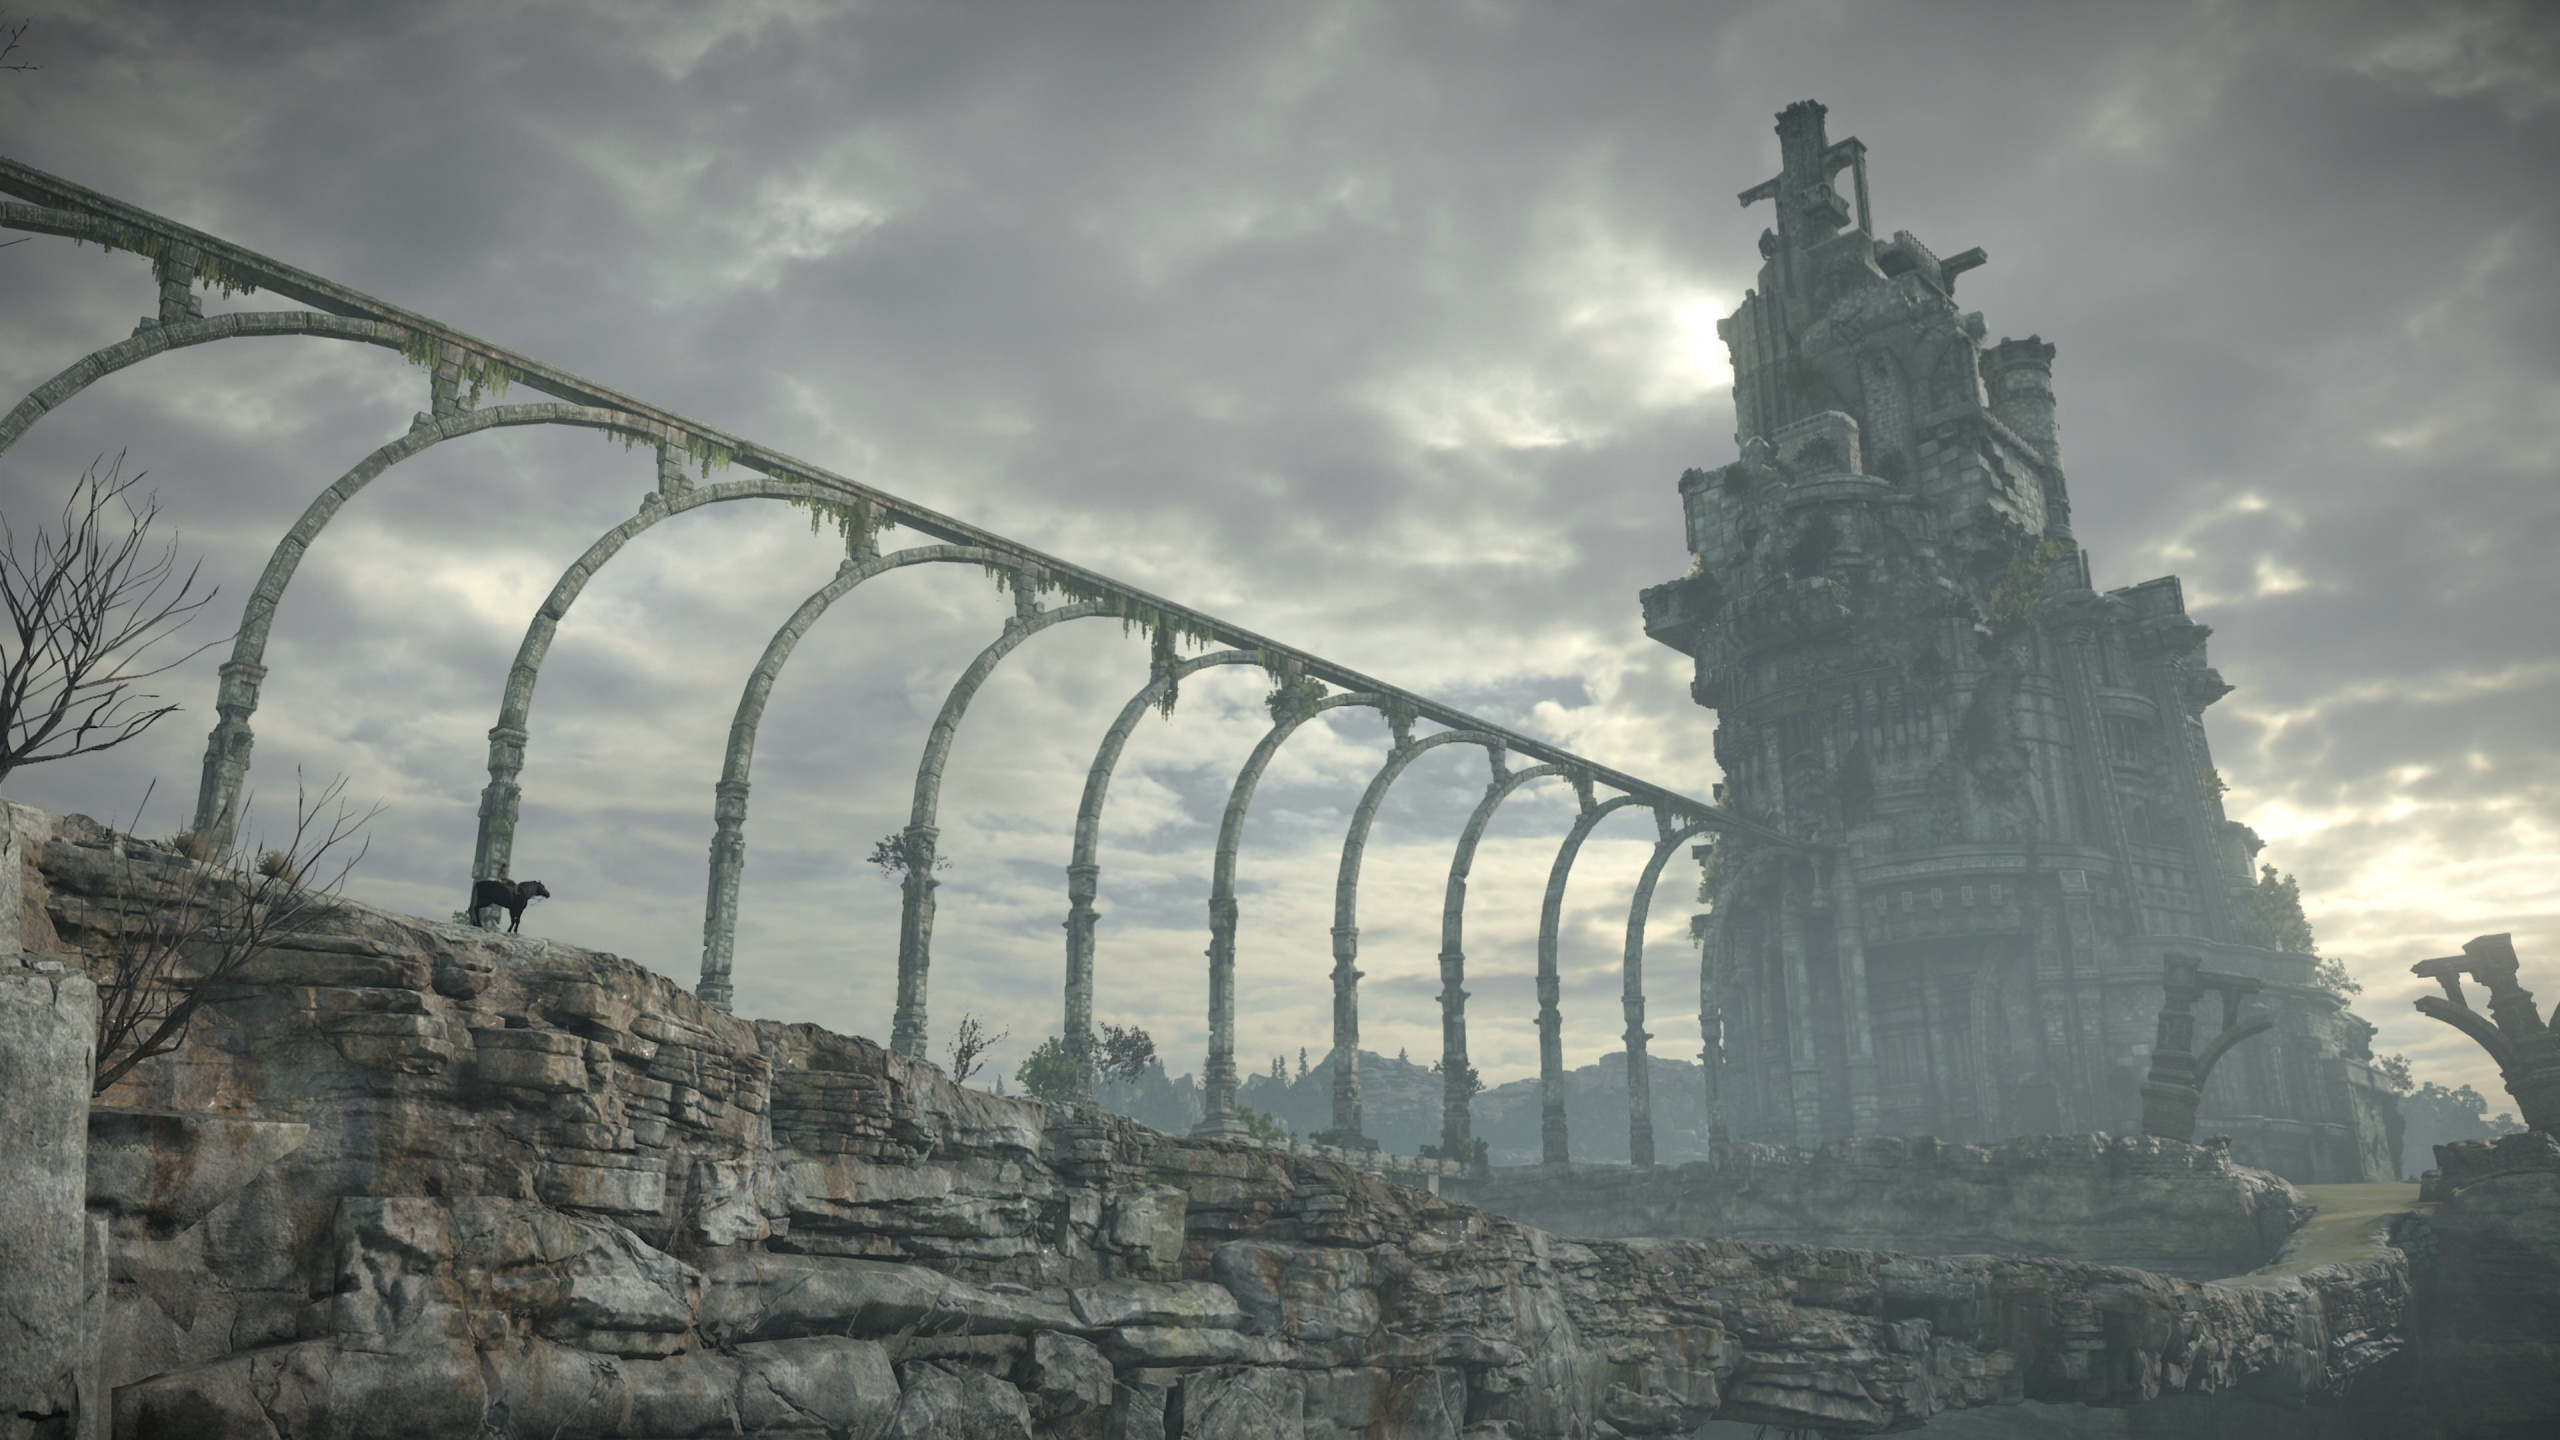 L'ombre du Colosse, Playstation 4, Remake, Pont, Architecture. Wallpaper in 2560x1440 Resolution